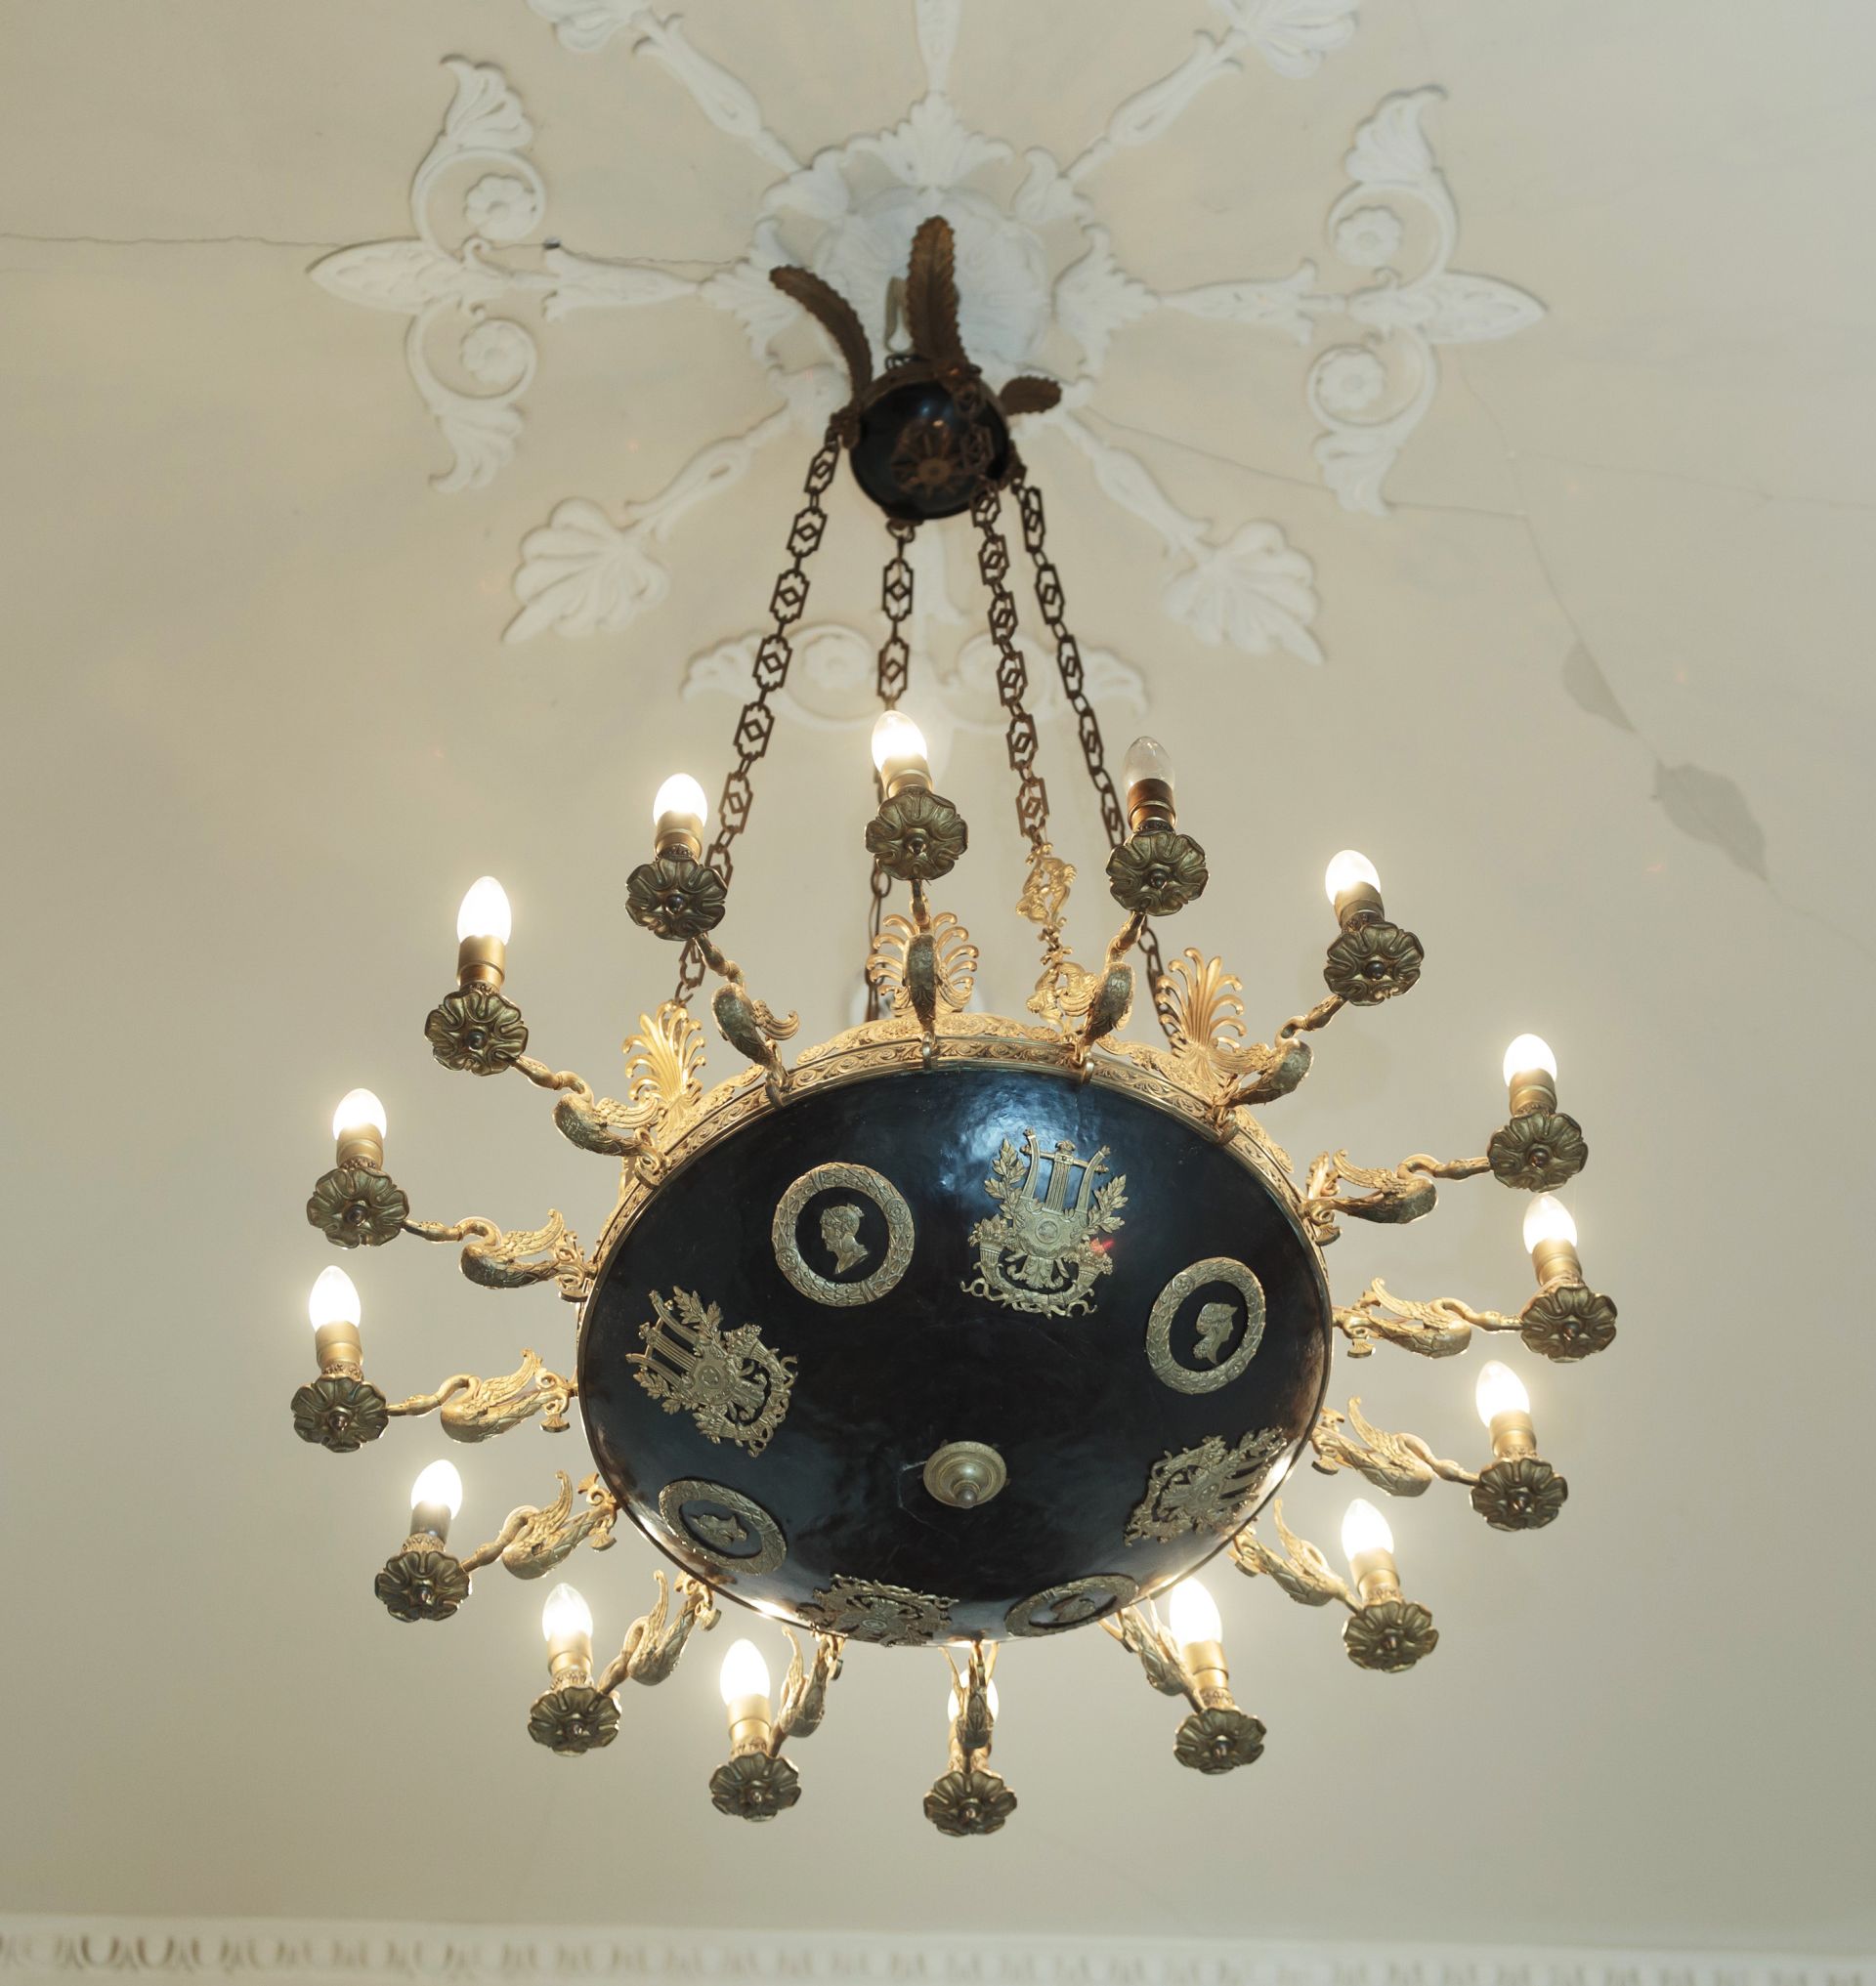 Chandelier, 1800–1829, Lithuanian National Museum of Art, TM-658. Photo by Tomas Kapočius, 2017